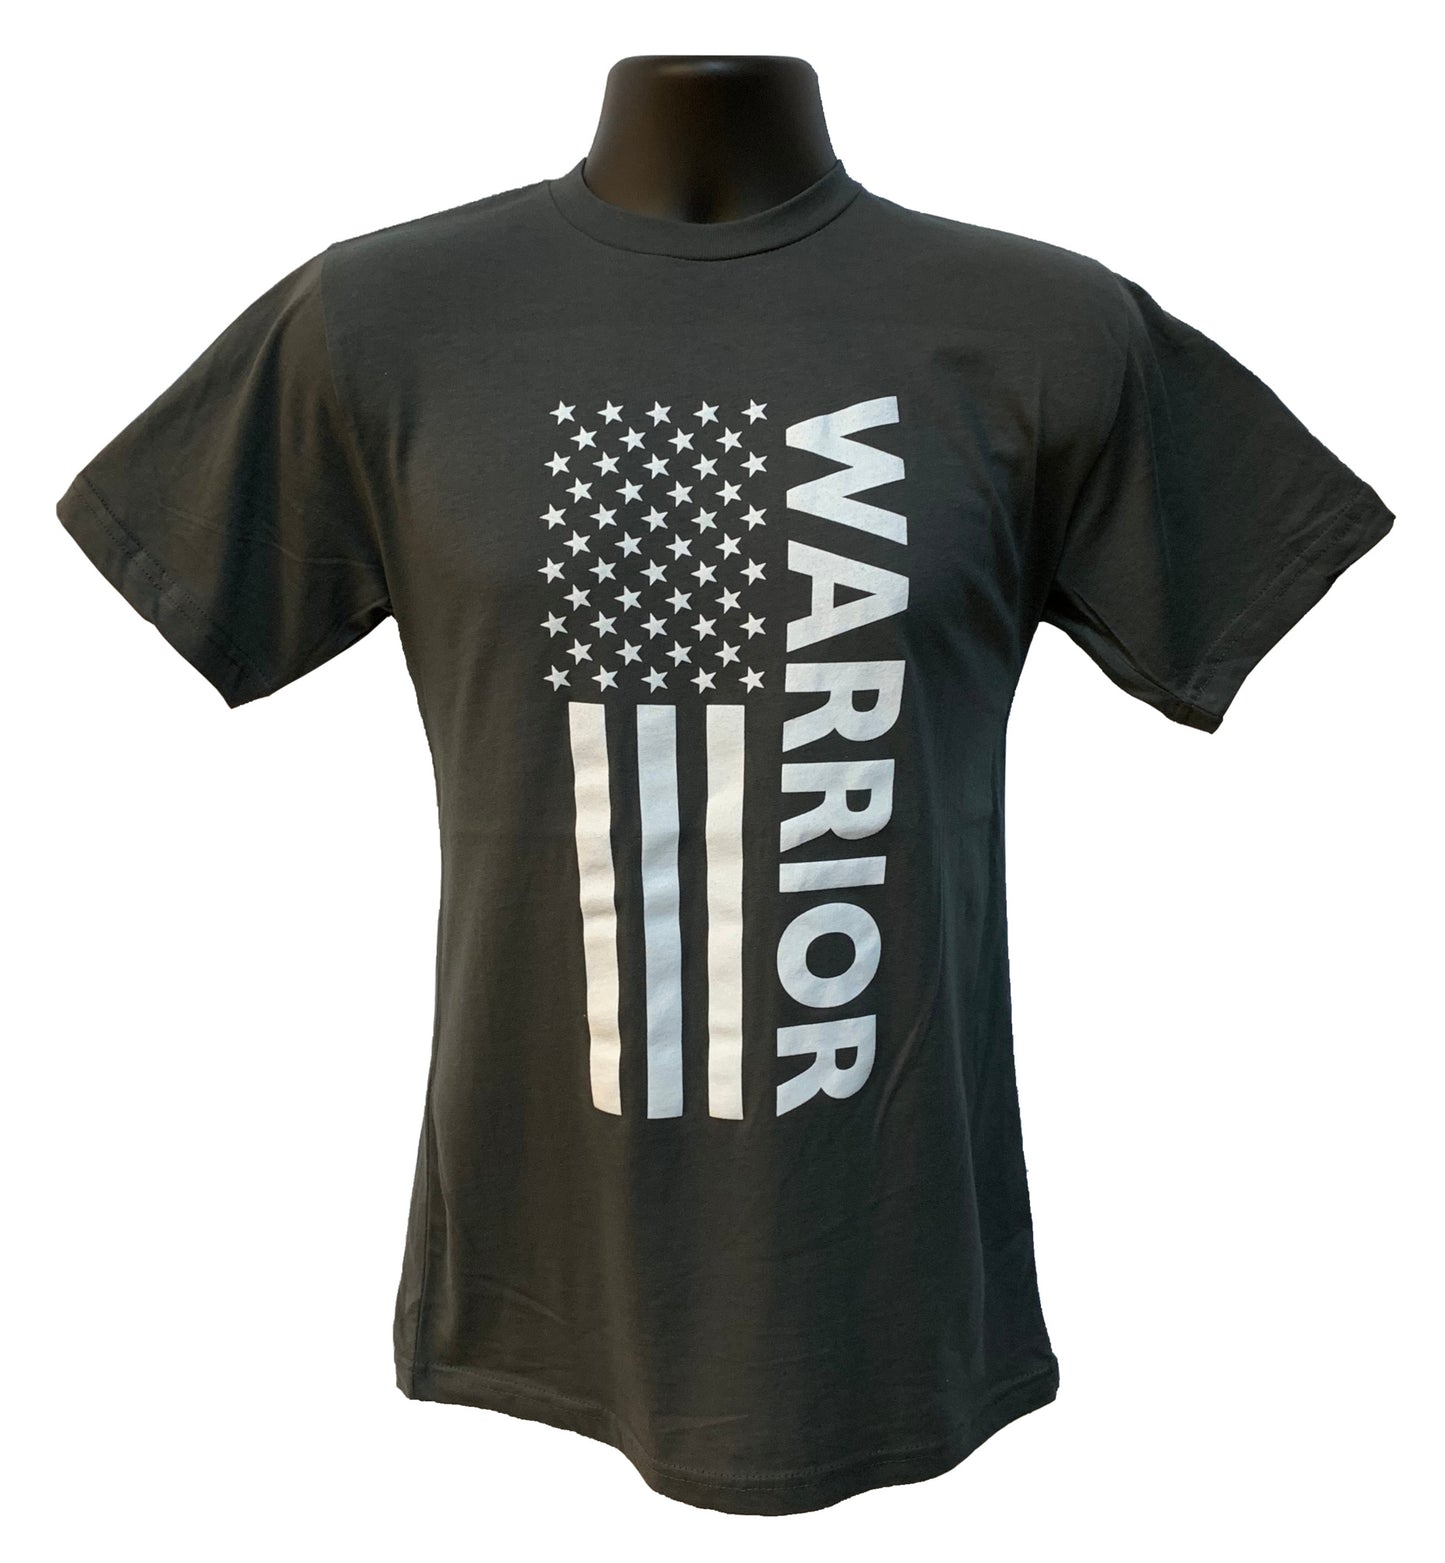 Grunt Force "WARRIOR" American Flag 100% Cotton T-Shirt - 7 Colors